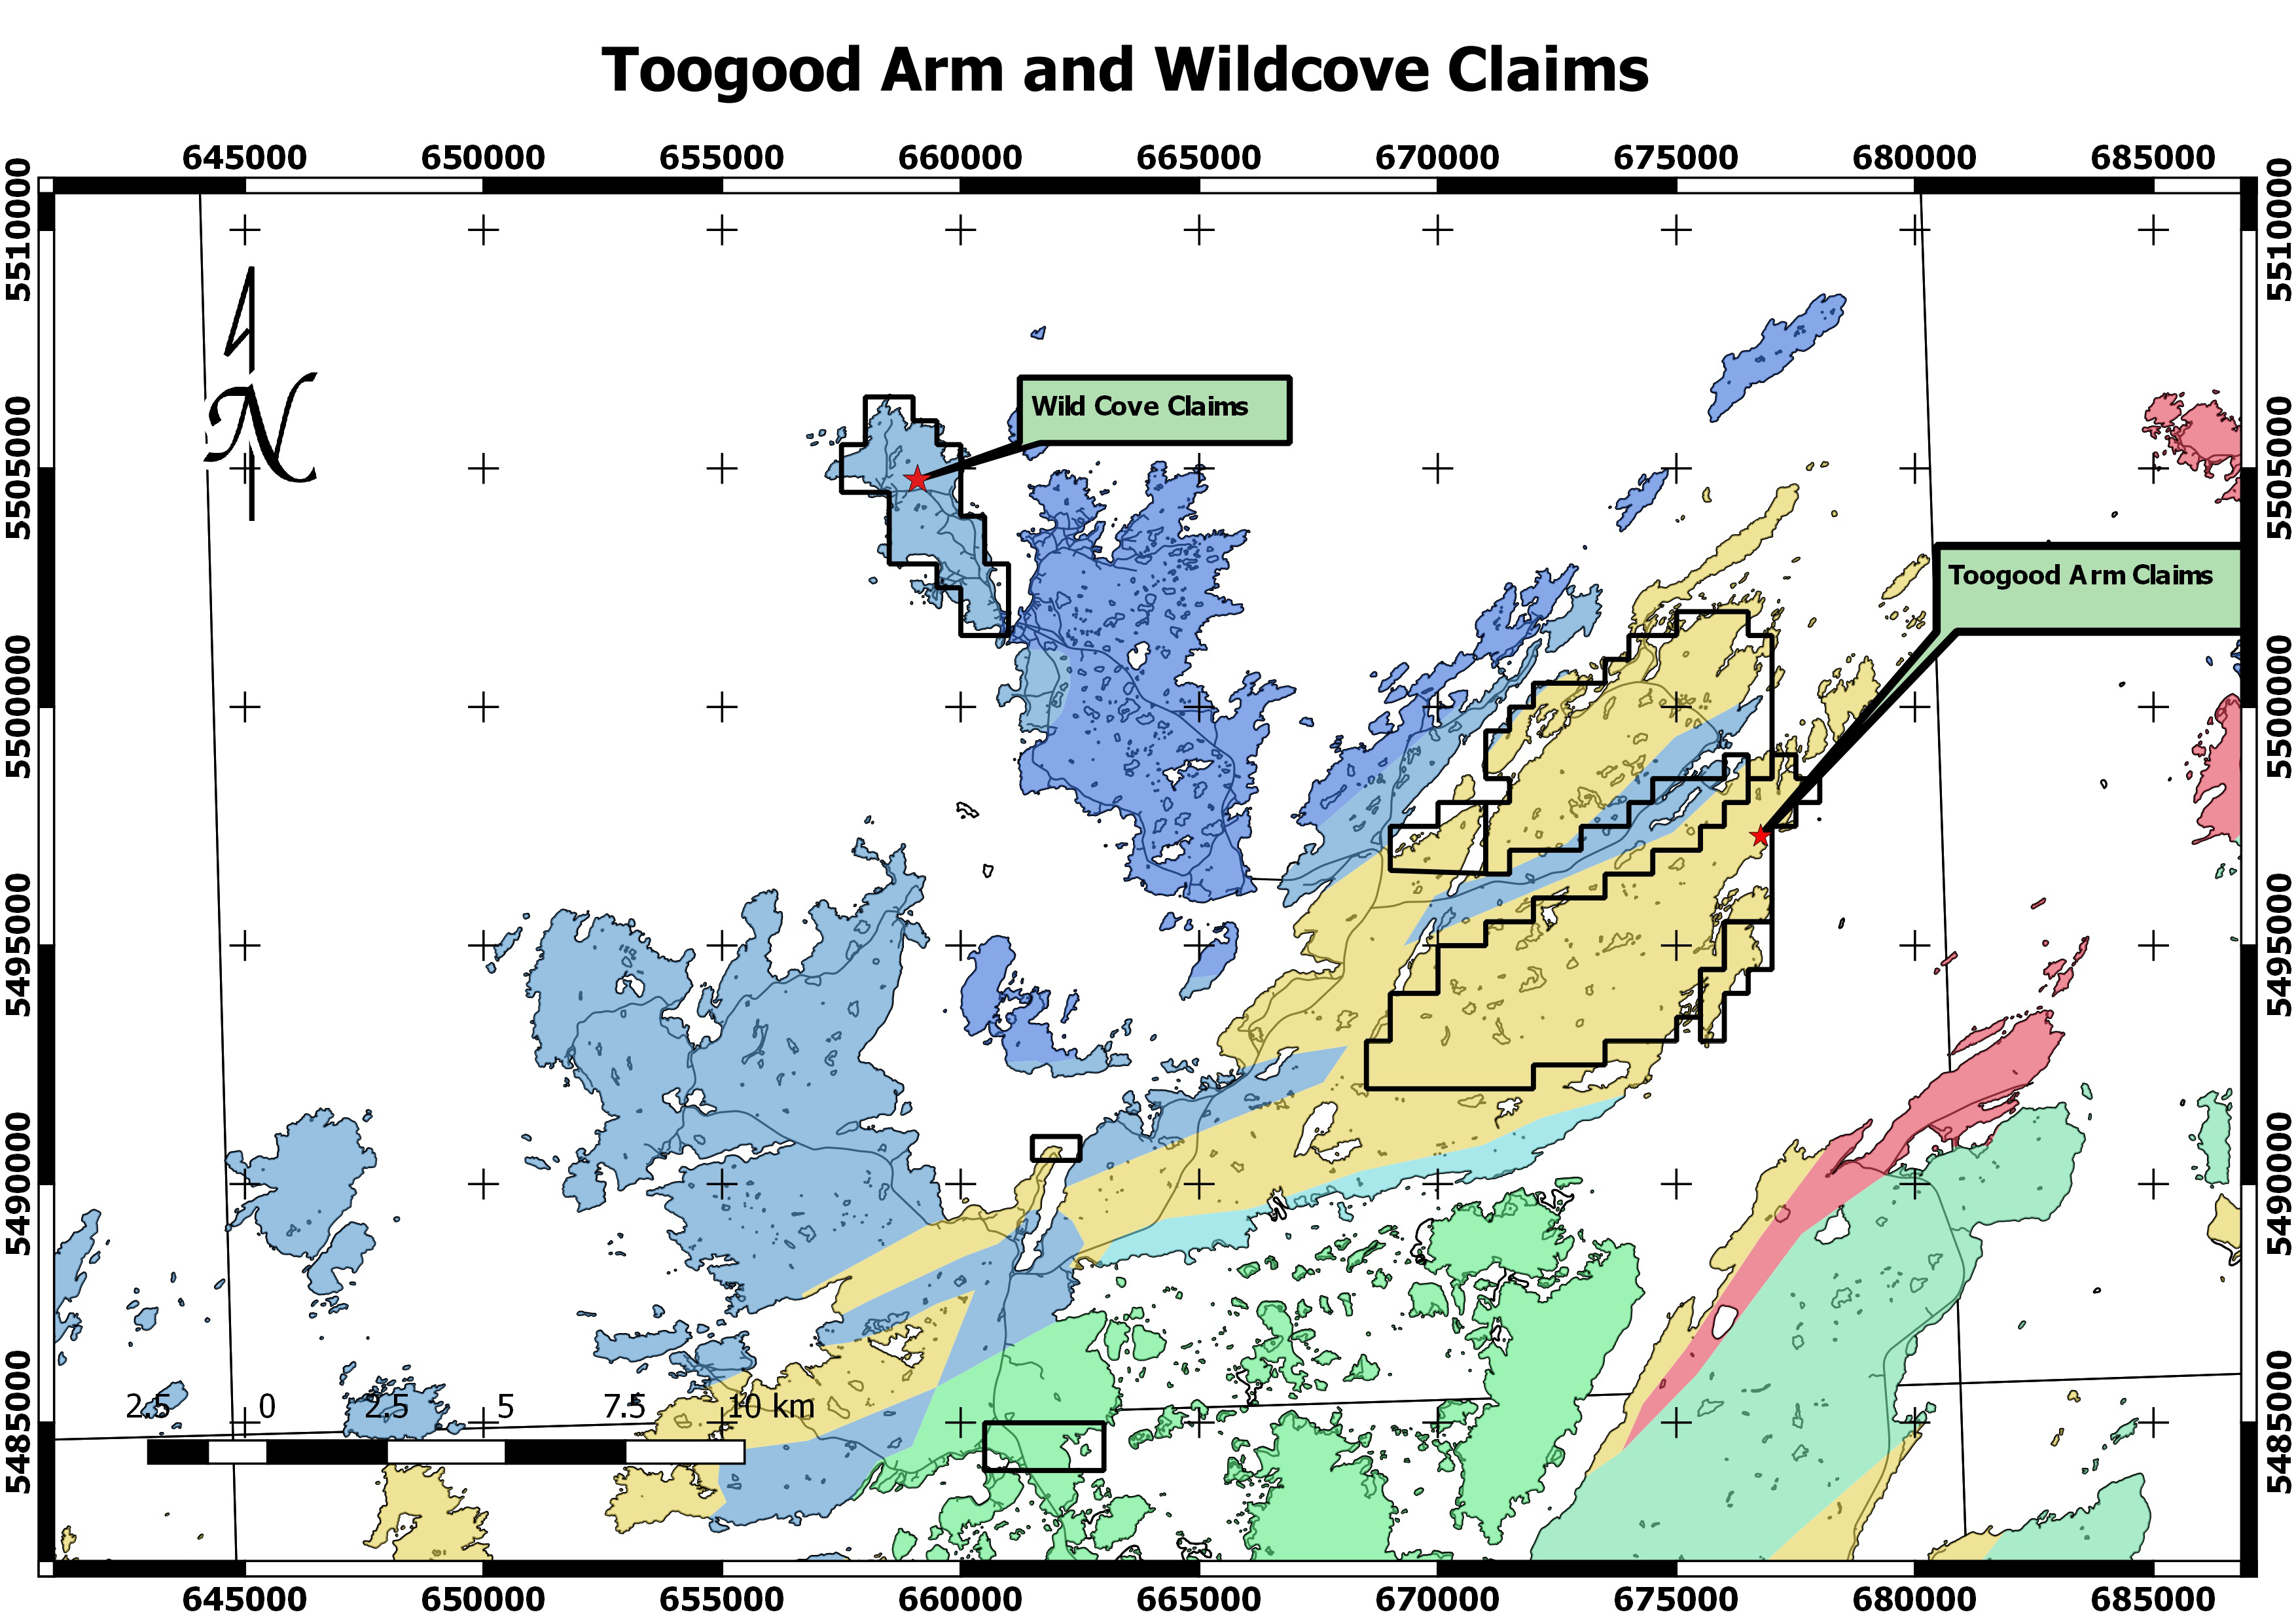 Toogood Arm and Wildcove Claims